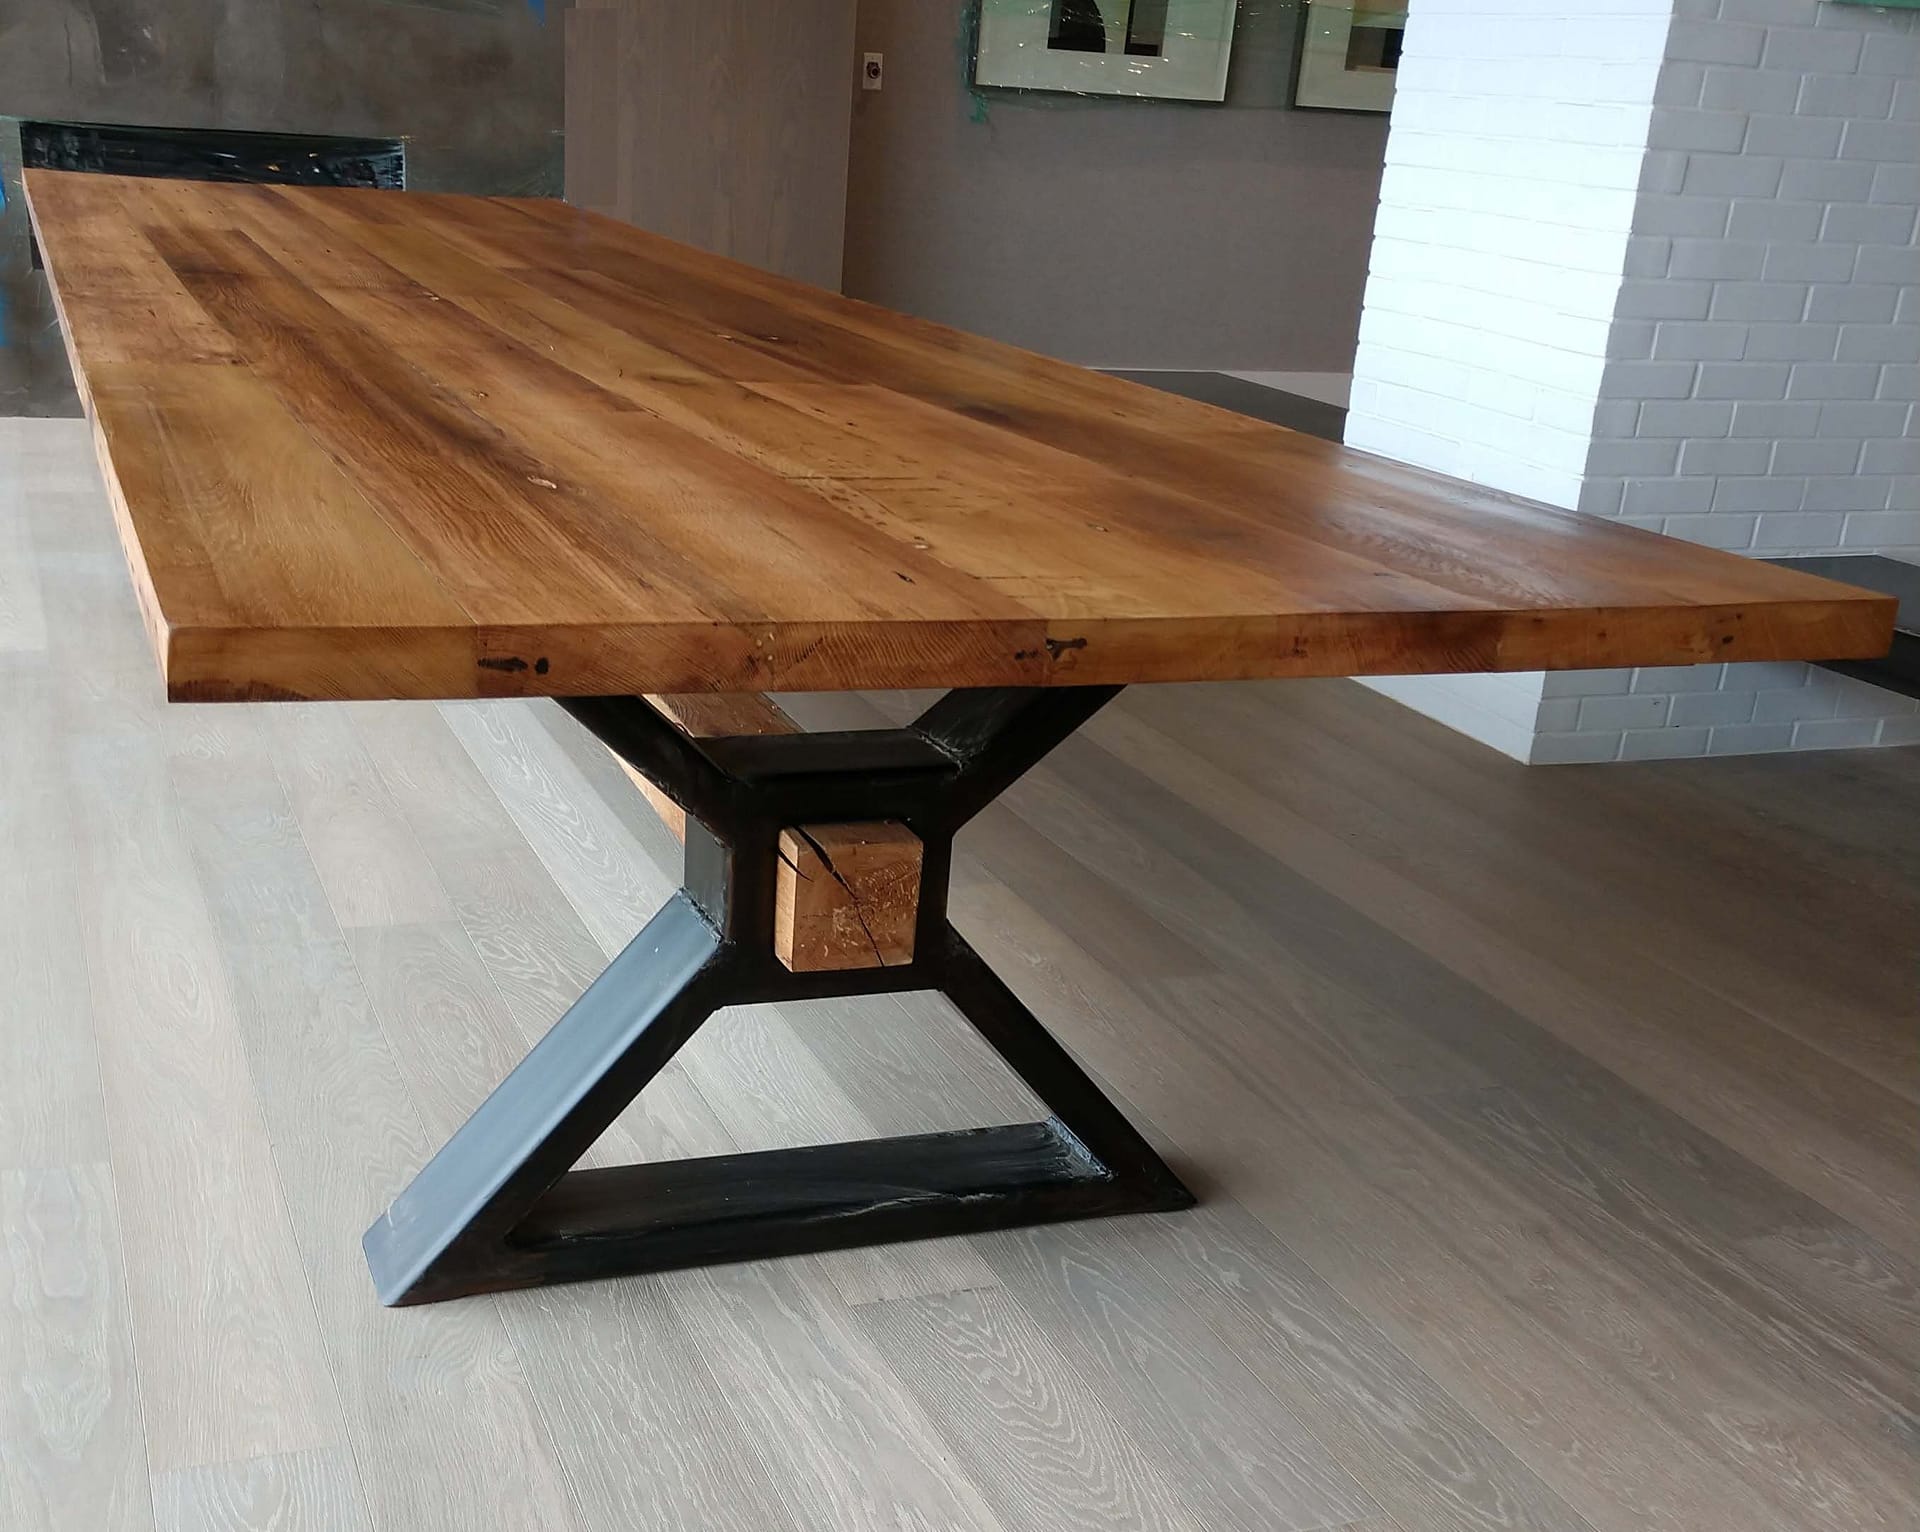 The Executive - Conference Table from Reclaimed Oak and Modern